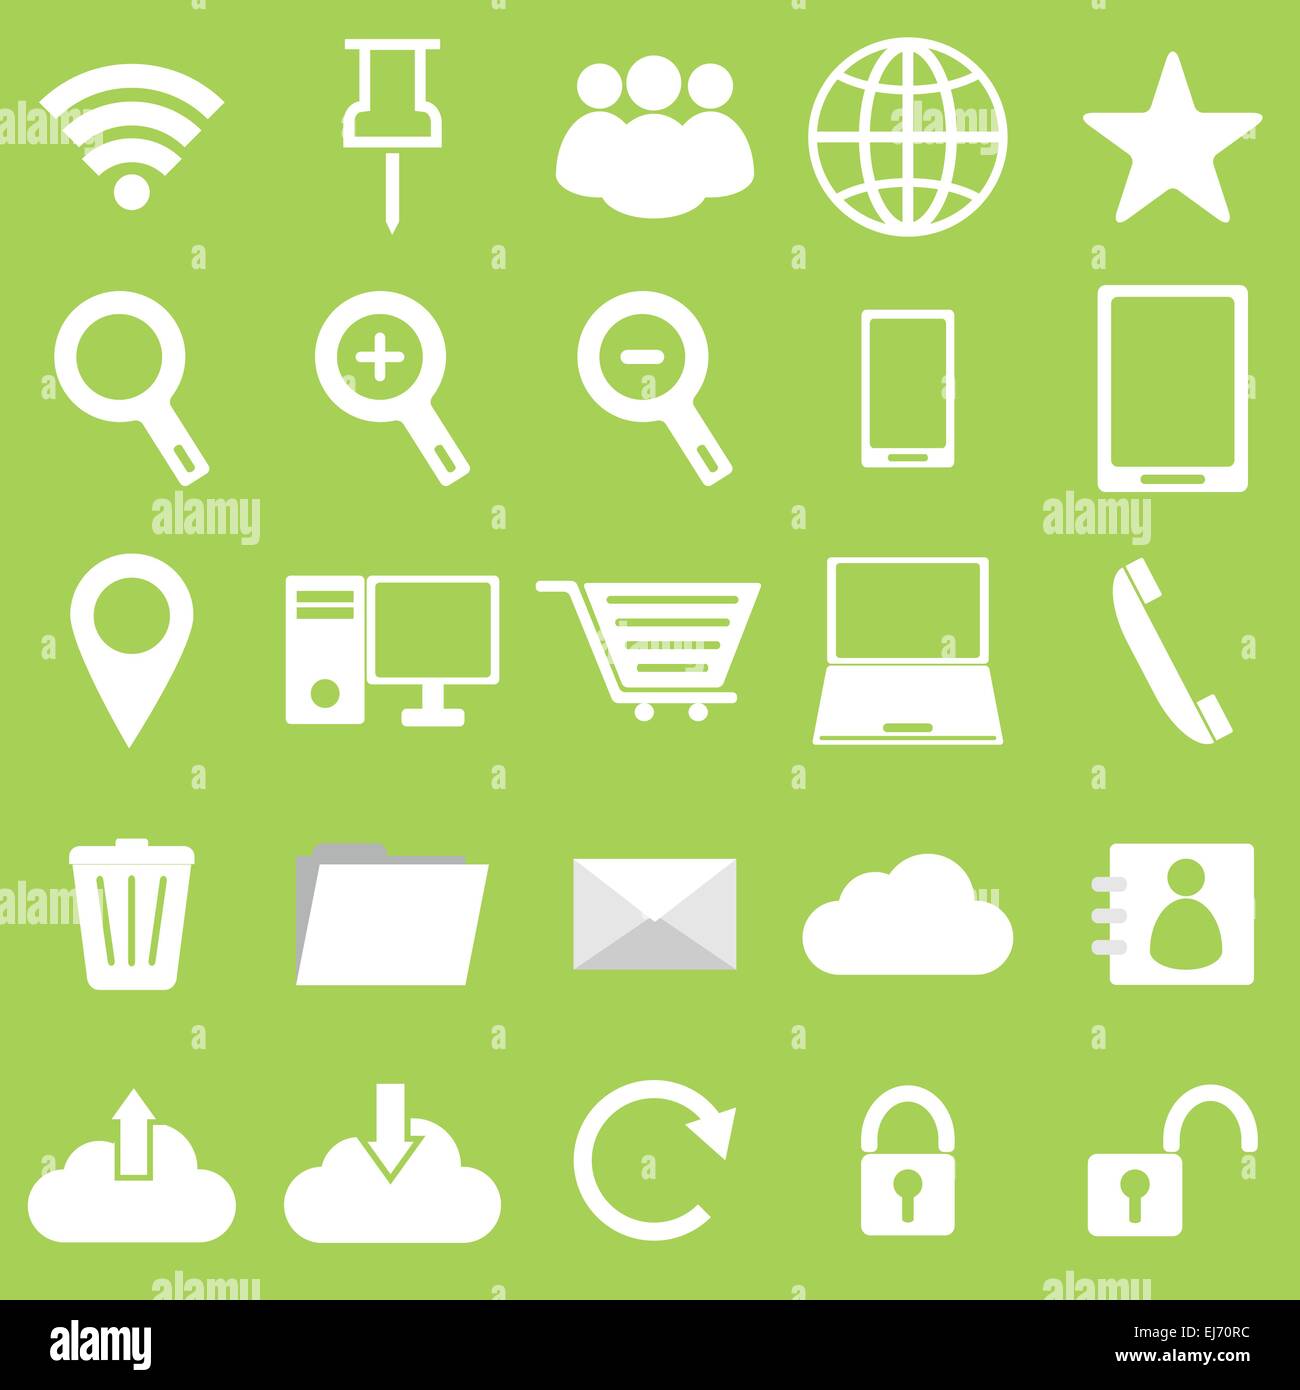 Internet icons on green background, stock vector Stock Vector